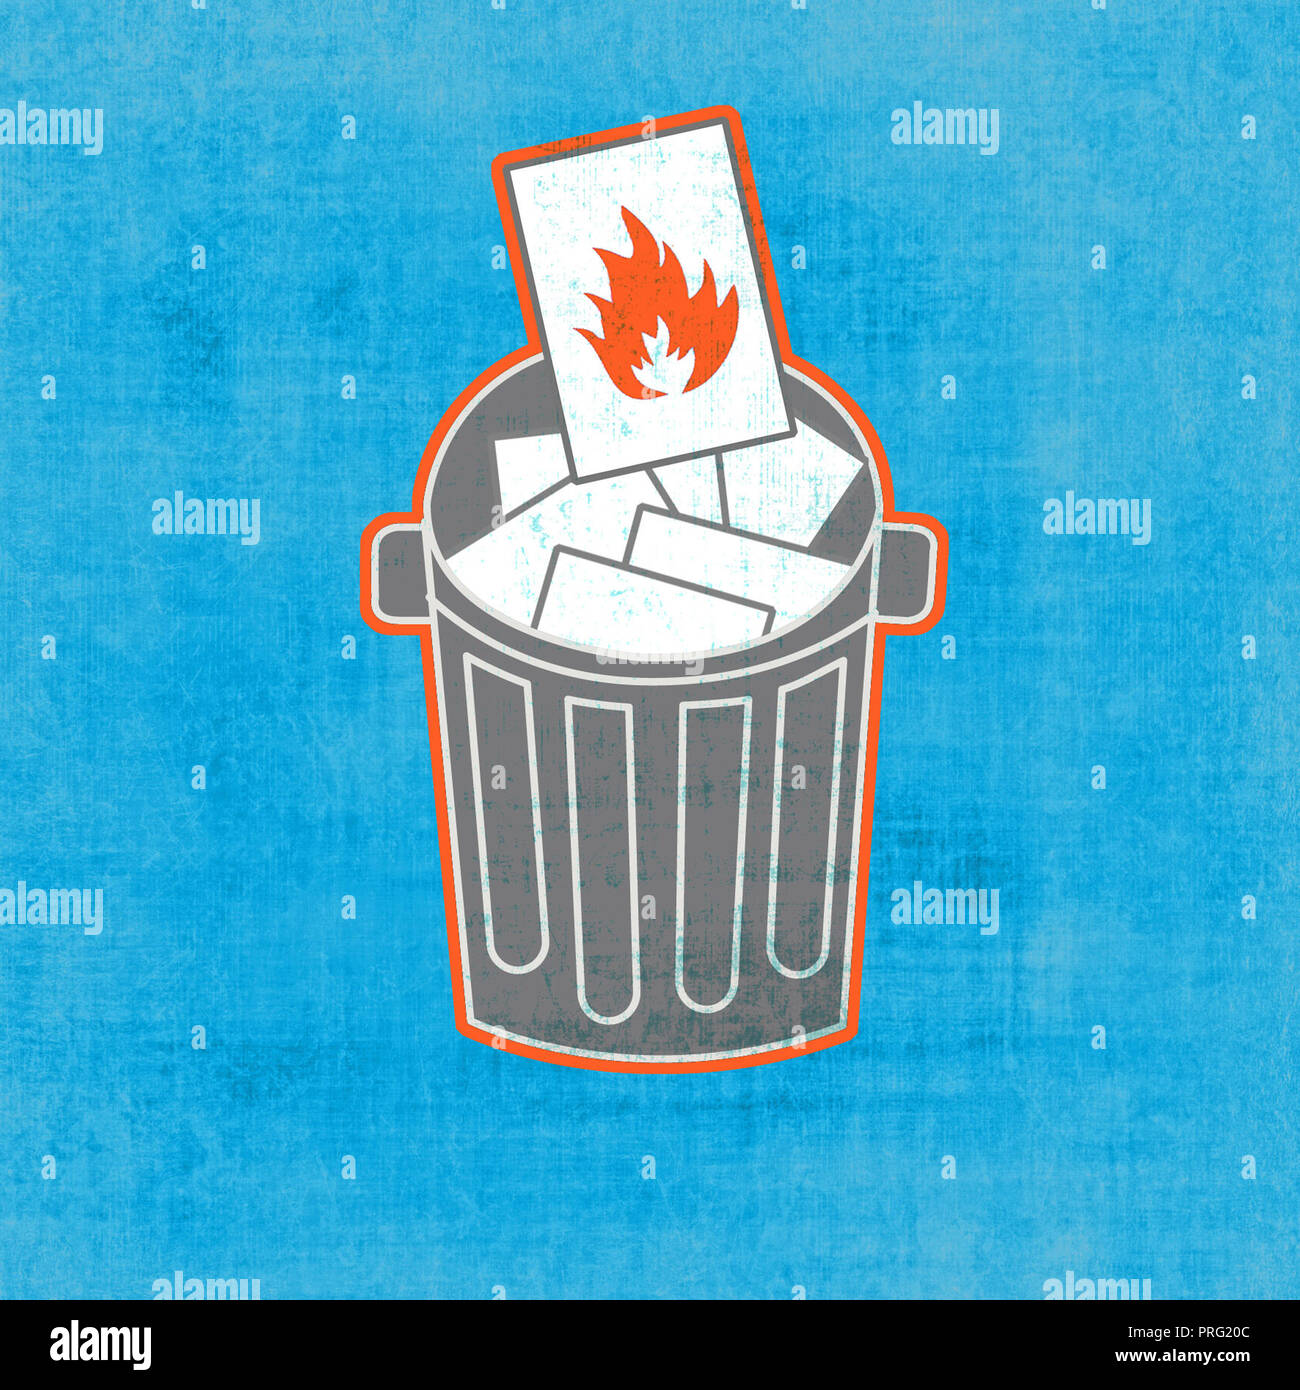 paper on fire falls into trash can Stock Photo